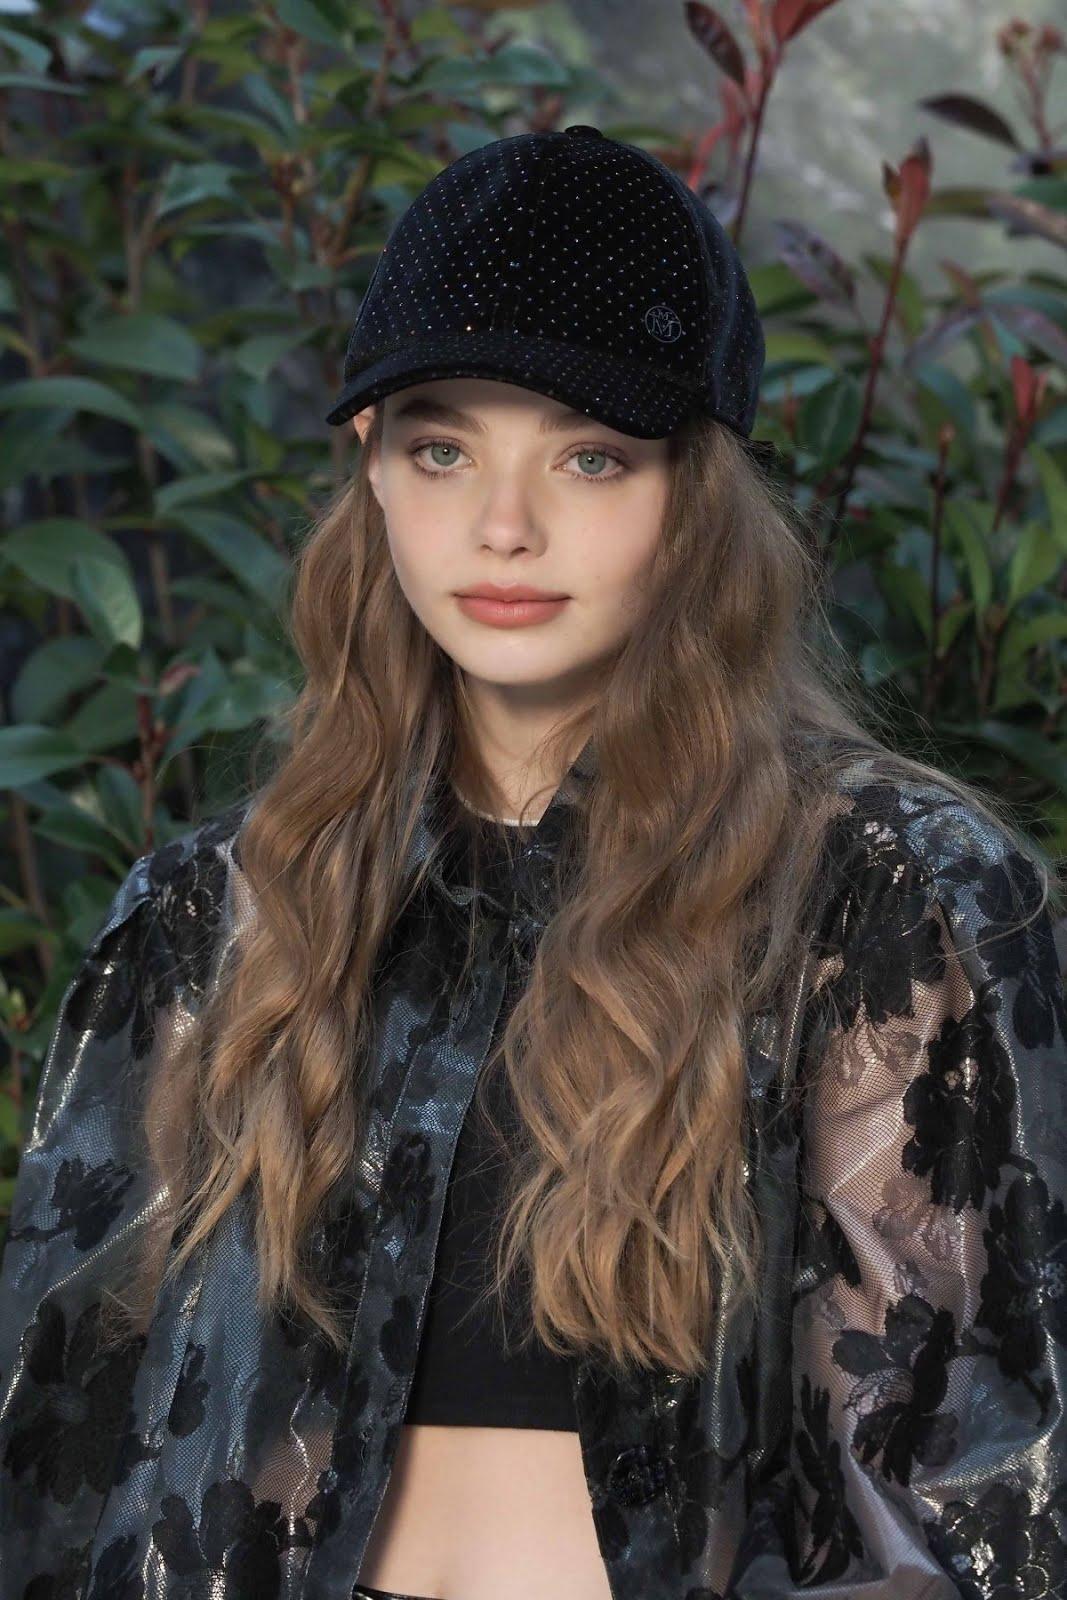 Kristine Froseth At Chanel Spring Summer 2019 haute Couture Fashion